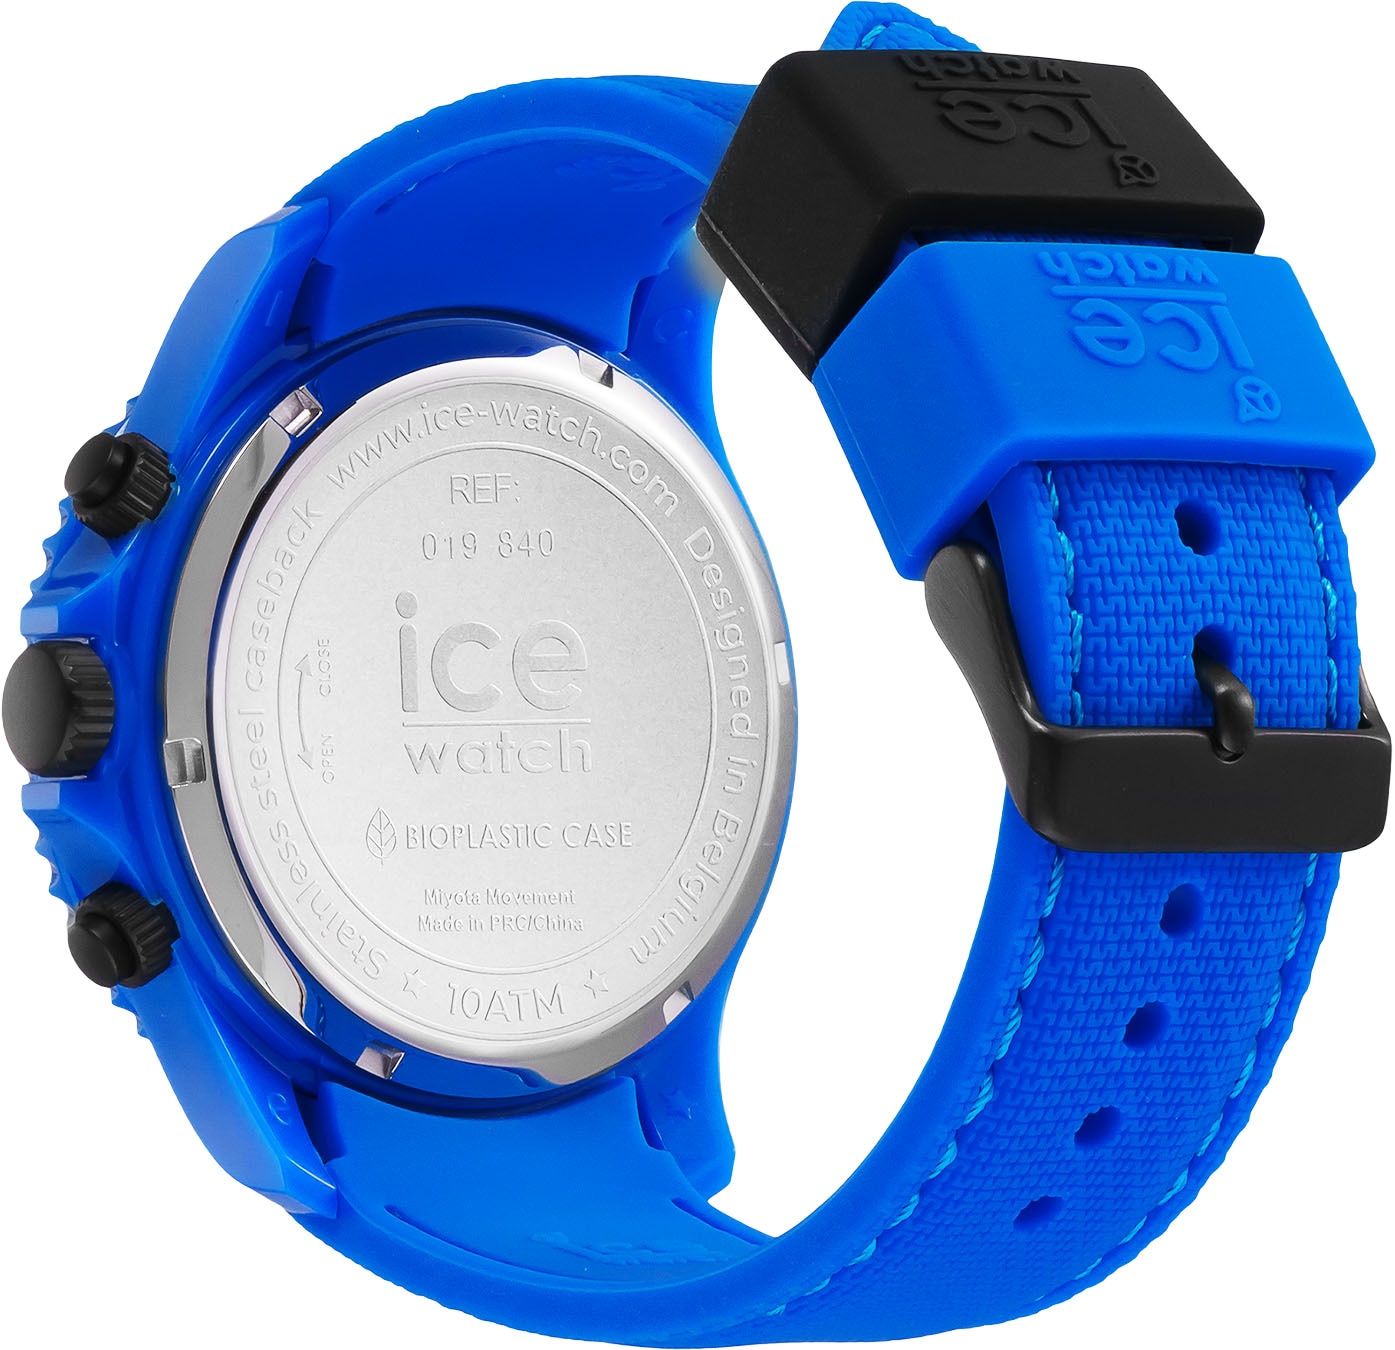 ice-watch Chronograph »ICE chrono - Neon blue - Large - CH, 019840« online  shoppen bei OTTO